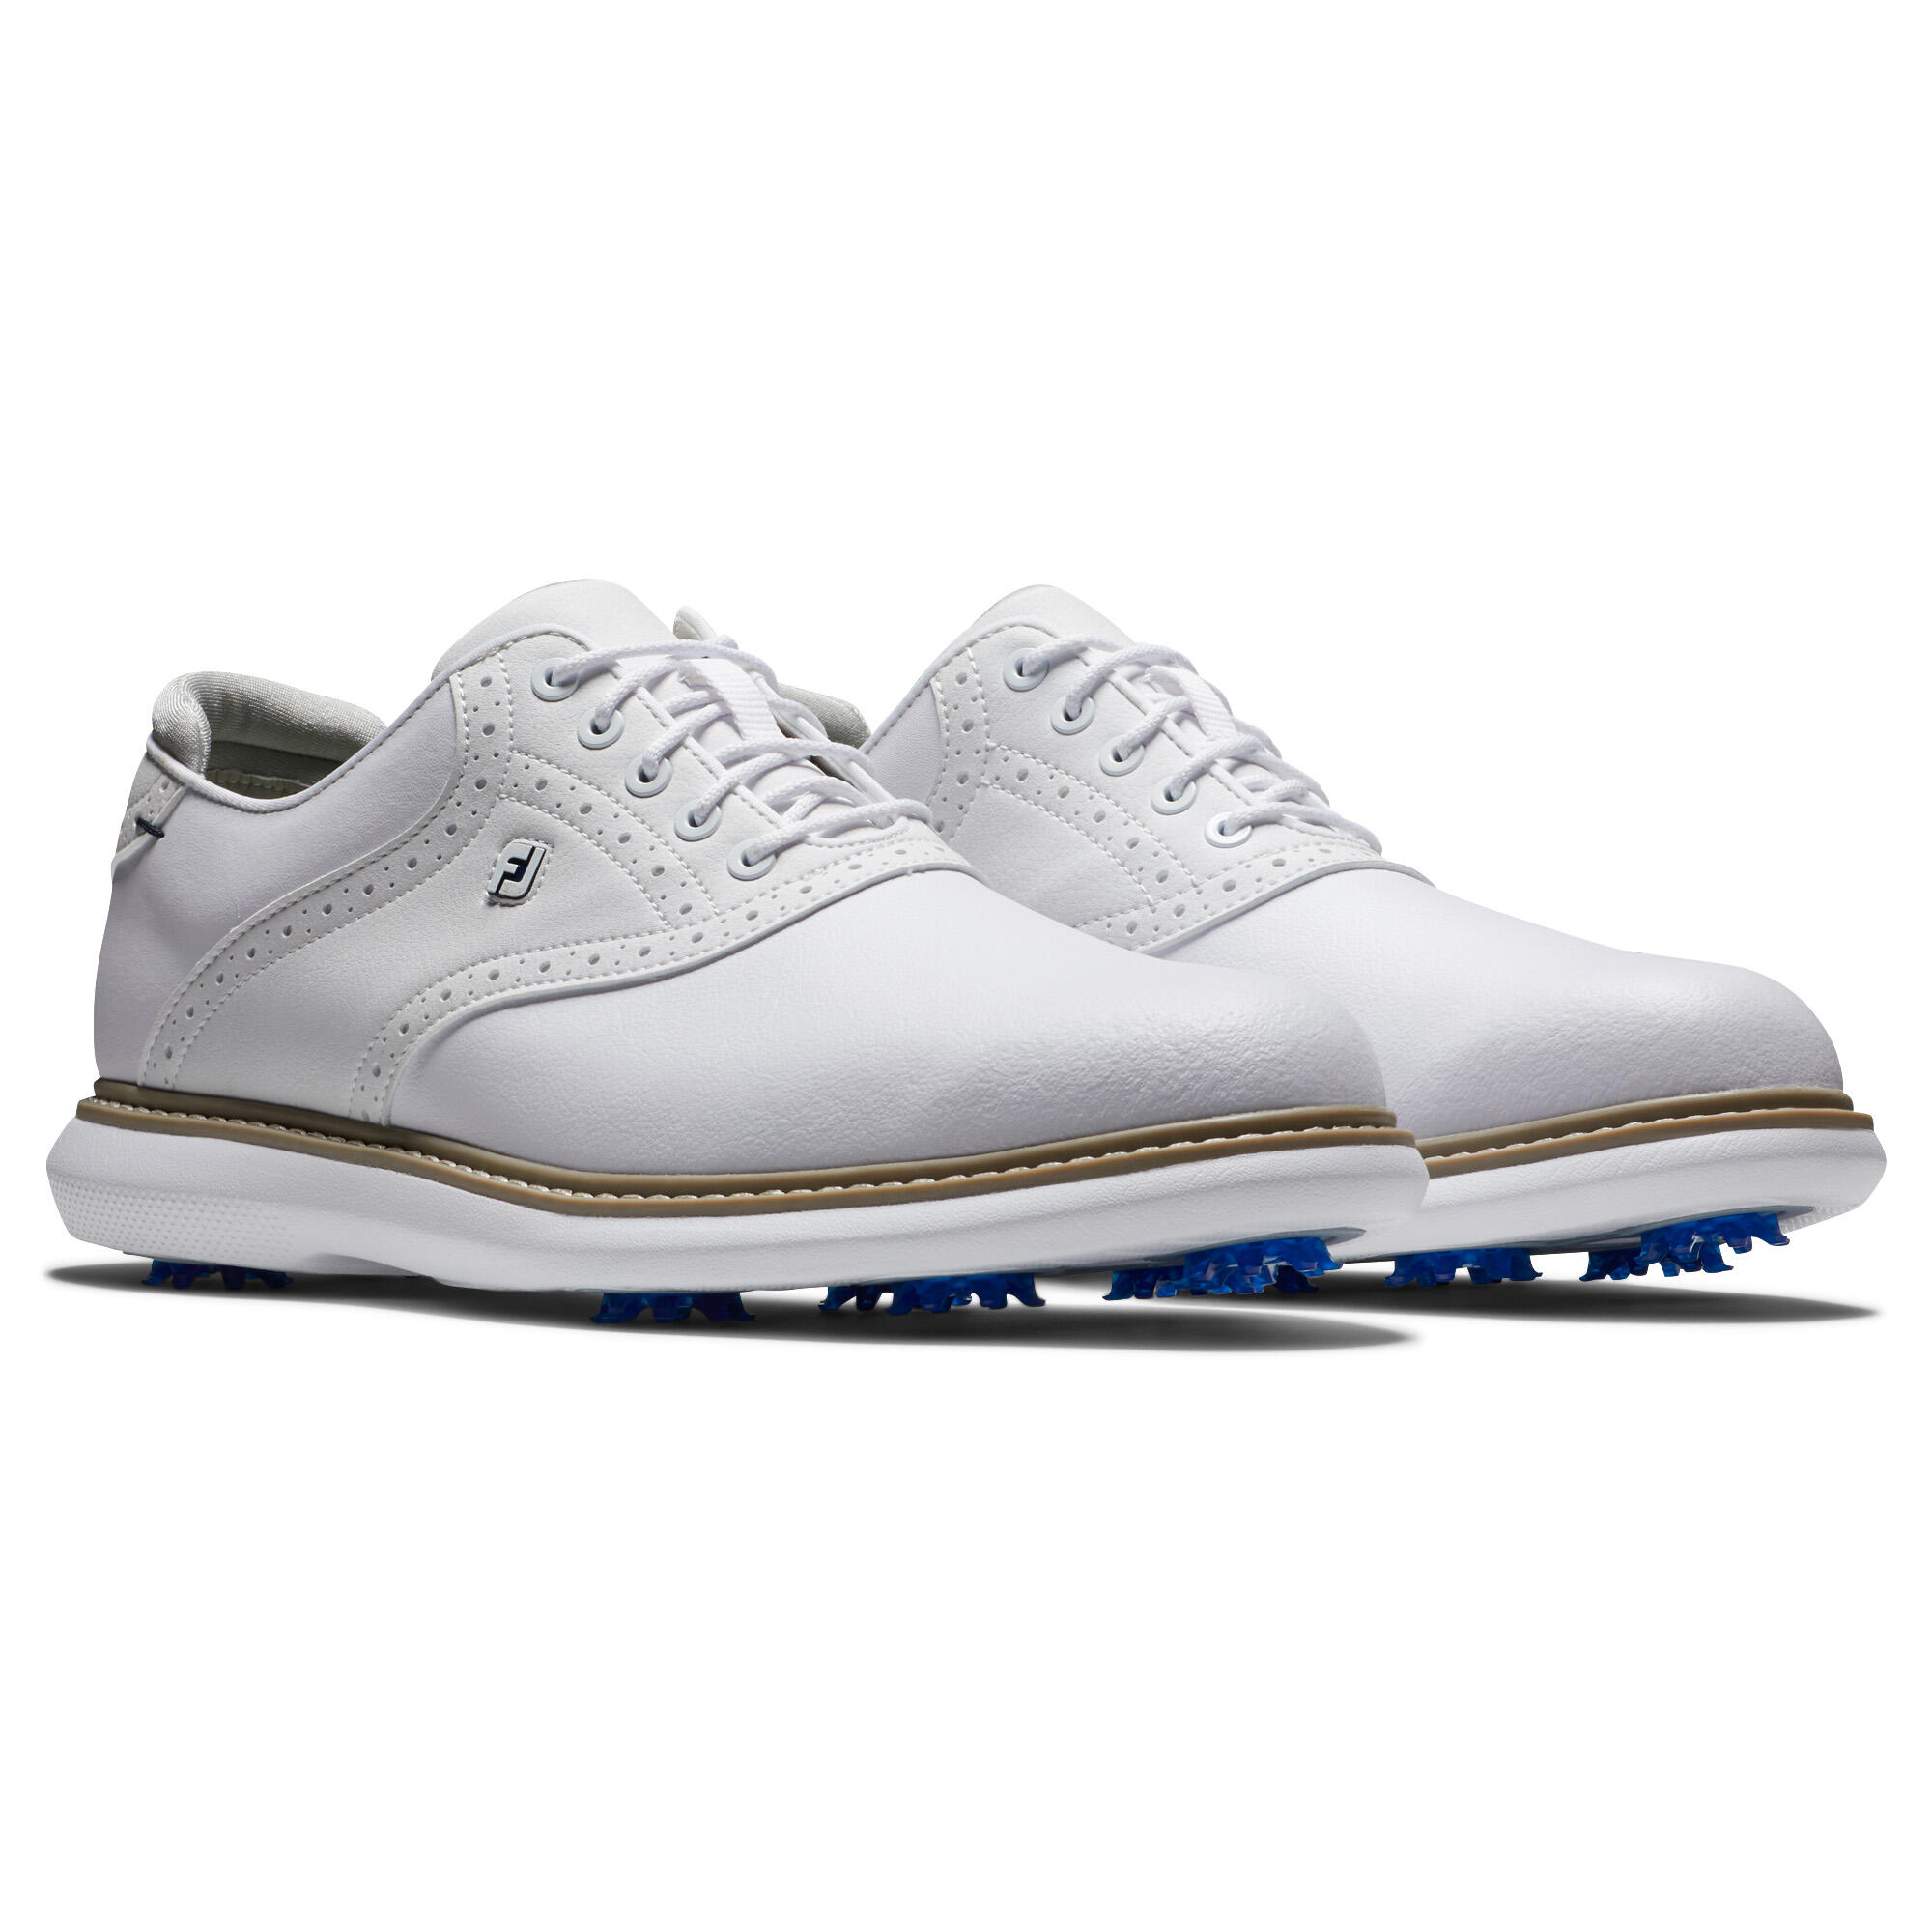 MEN'S GOLF SHOES FOOTJOY WATERPROOF - TRADITIONS WHITE 1/6